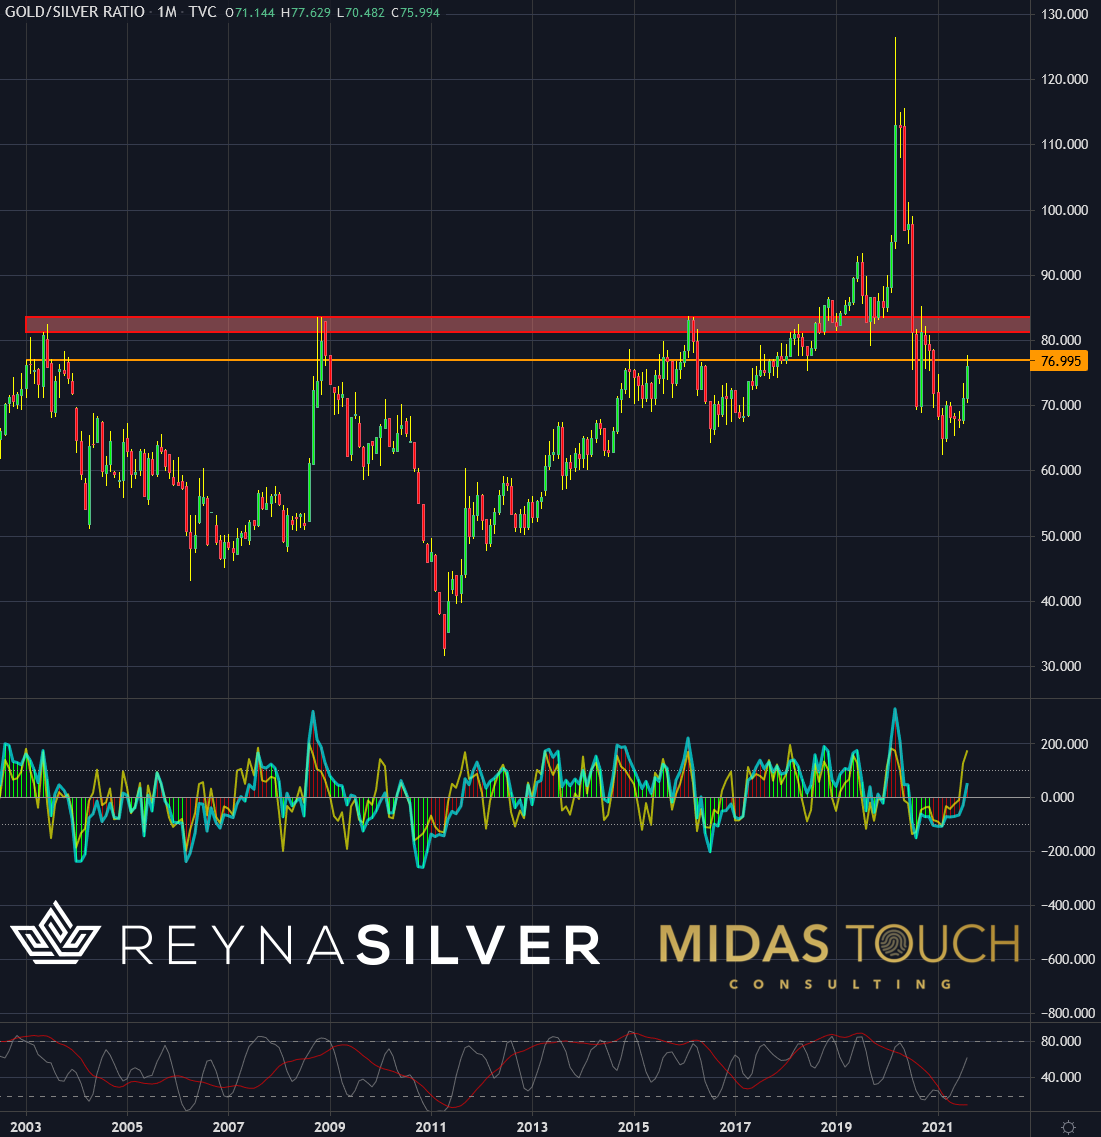 Chart-2-Gold-to-Silver-Ratio-monthly-chart-as-of-August-28th-2021..png